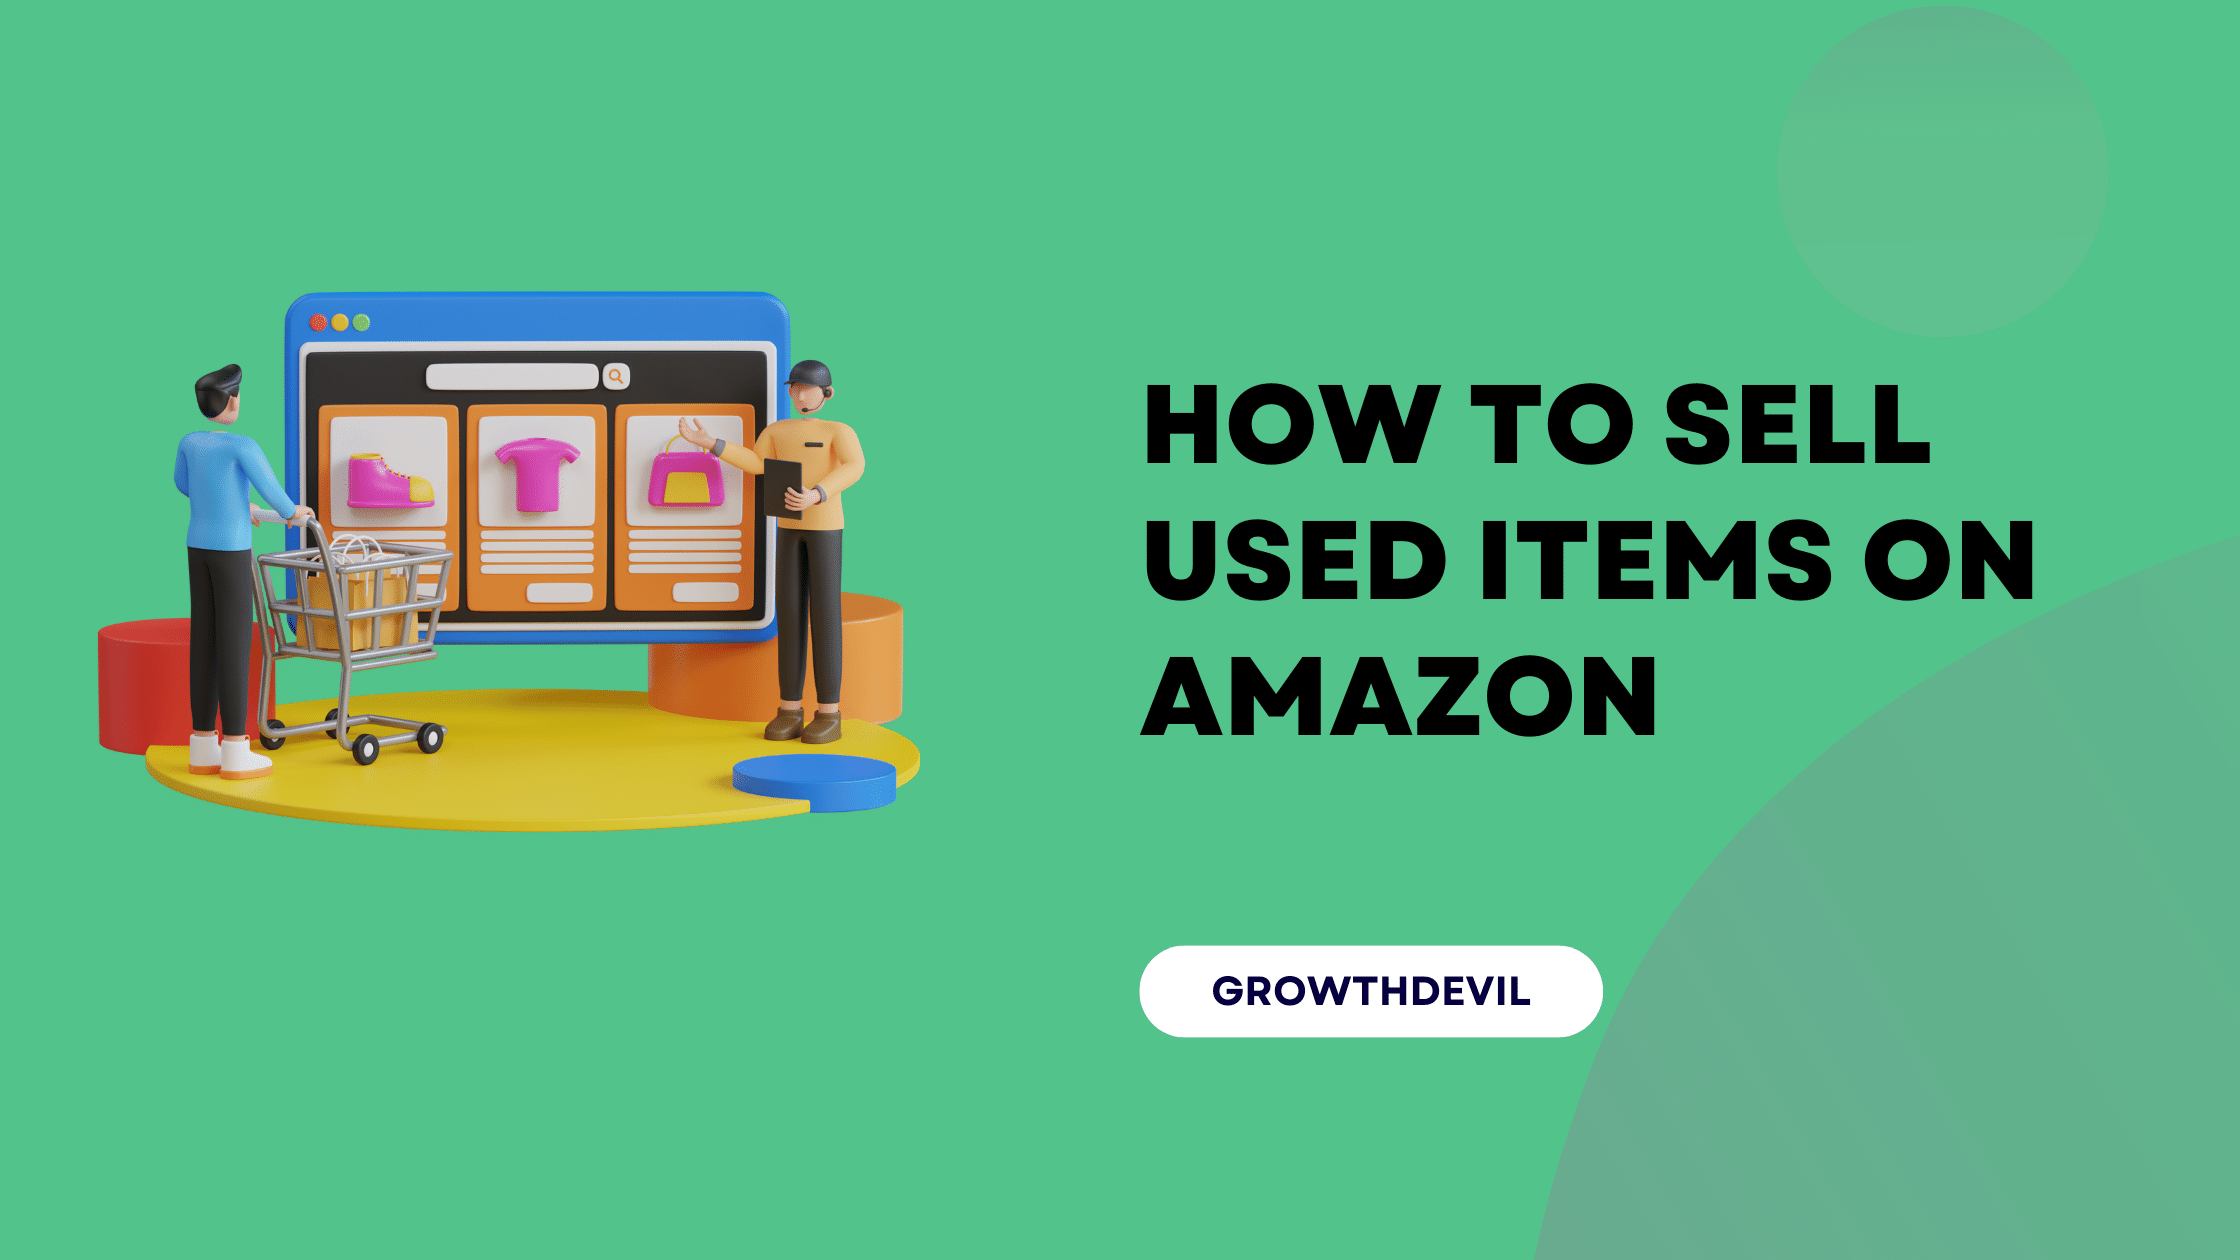 How To Sell Used Items On Amazon - GrowthDevil